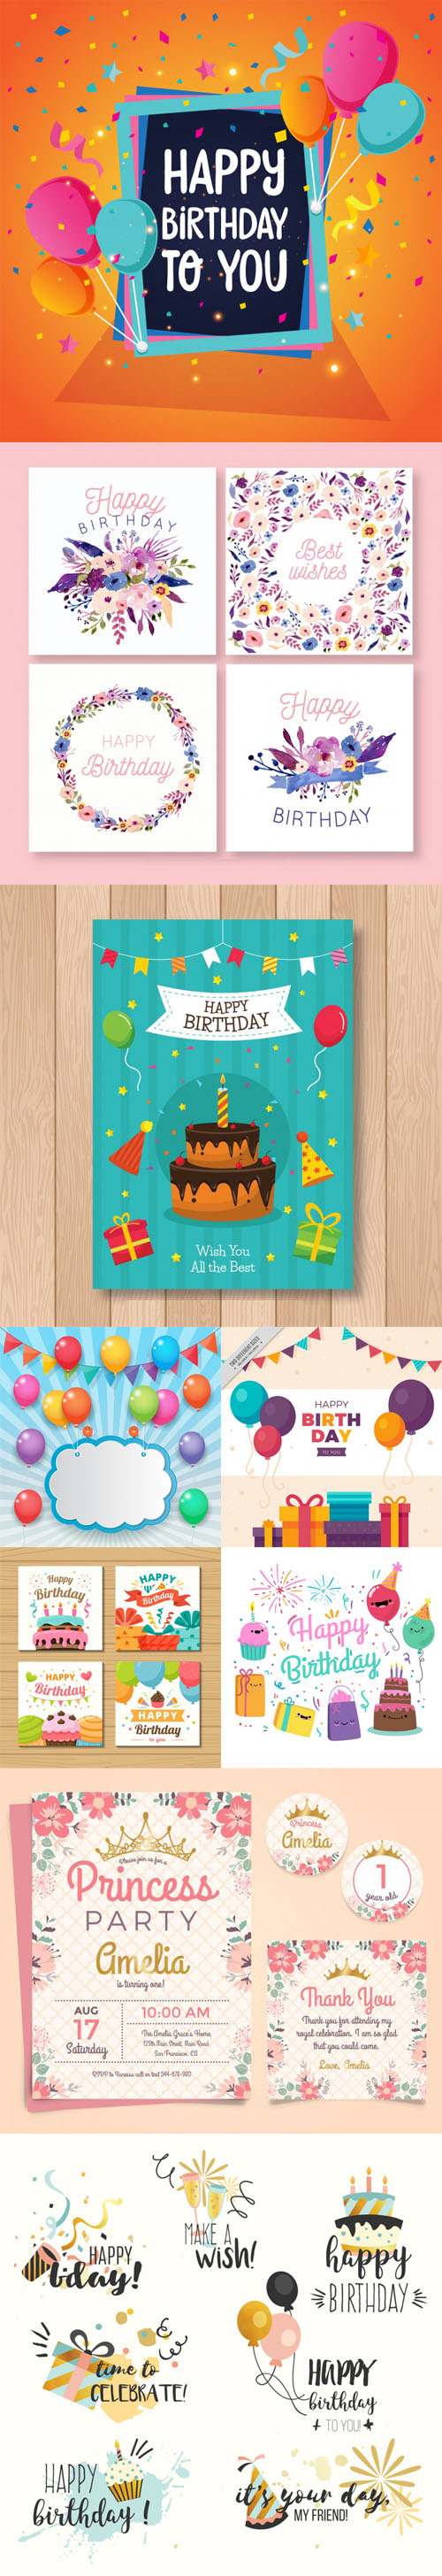 Collection of Happy Birthday Templates Design Vector